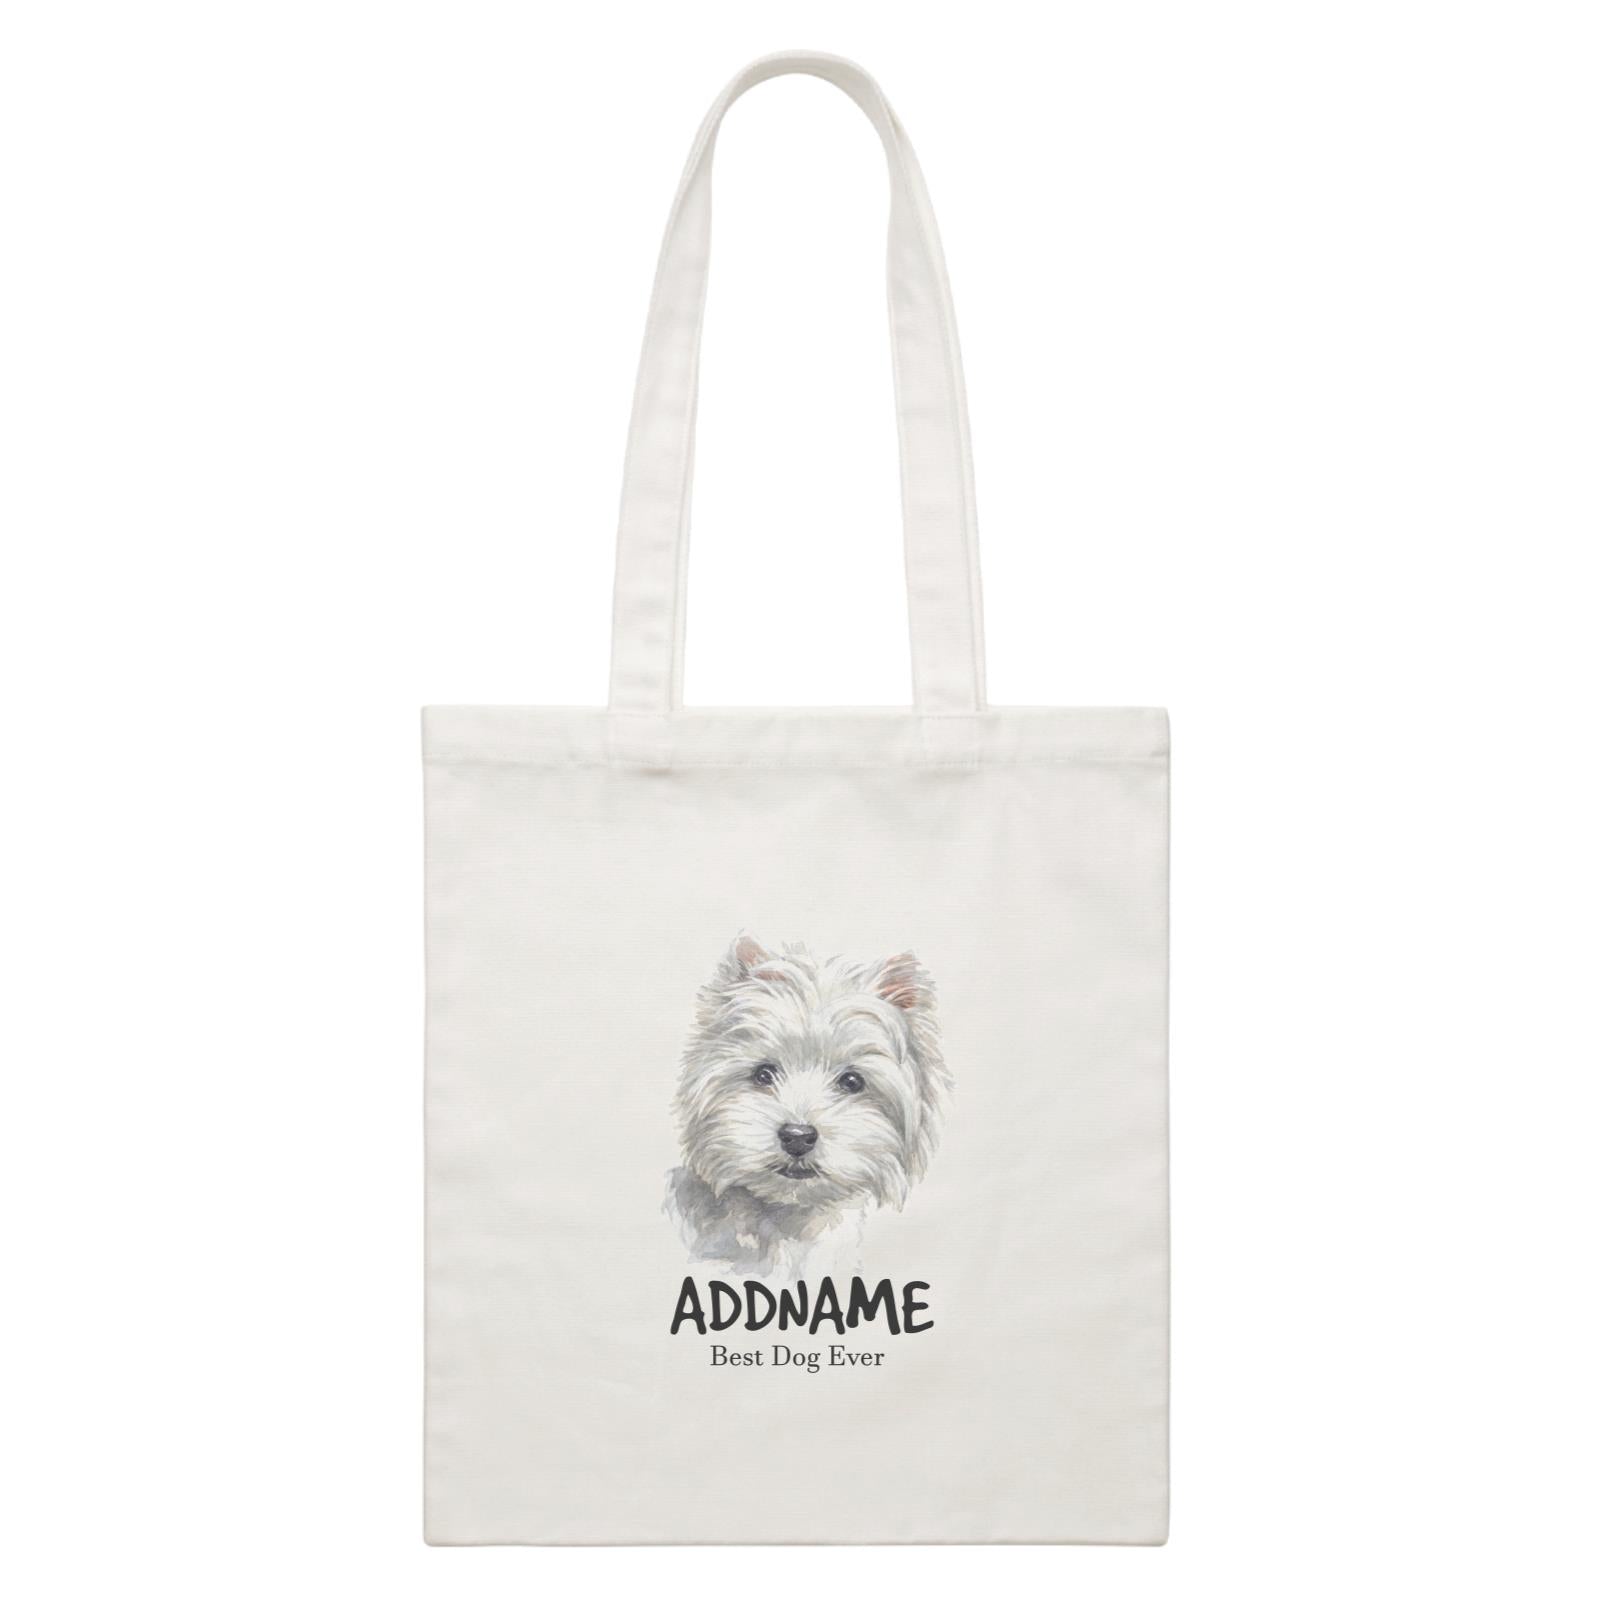 Watercolor Dog West Highland White Terrier Small Best Dog Ever Addname White Canvas Bag